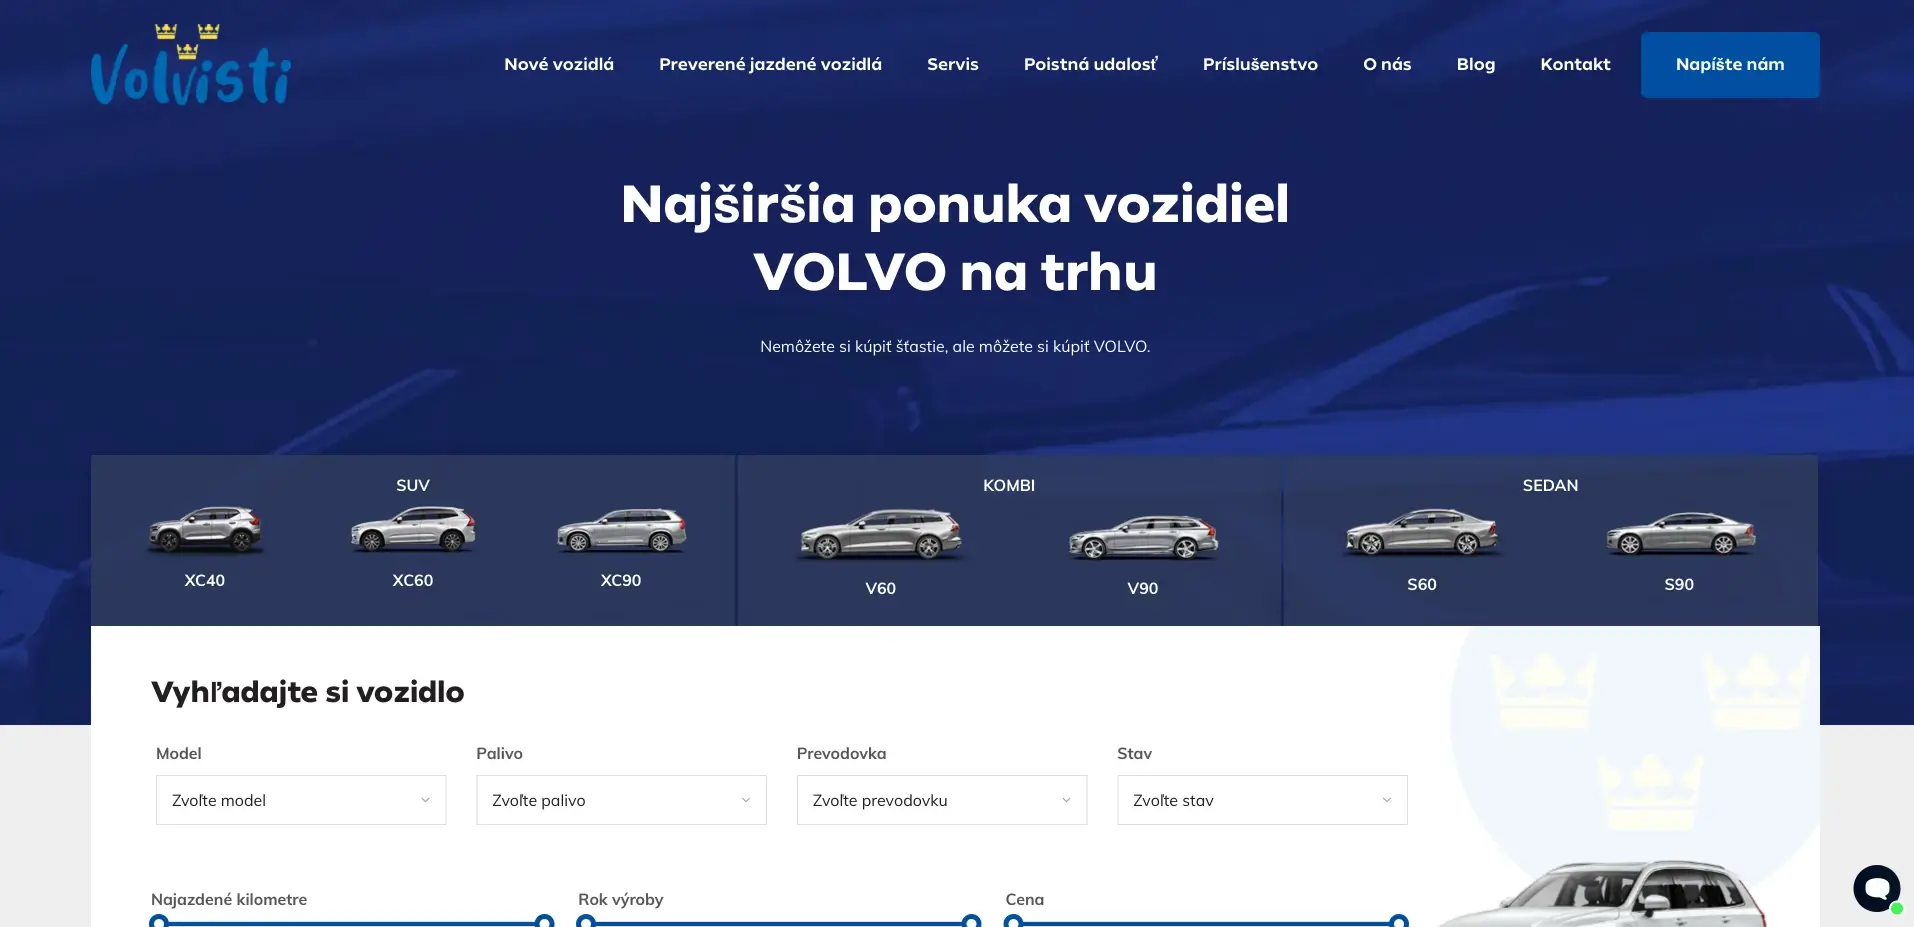 Volvisti - The Widest Offer of VOLVO Vehicles on the Market